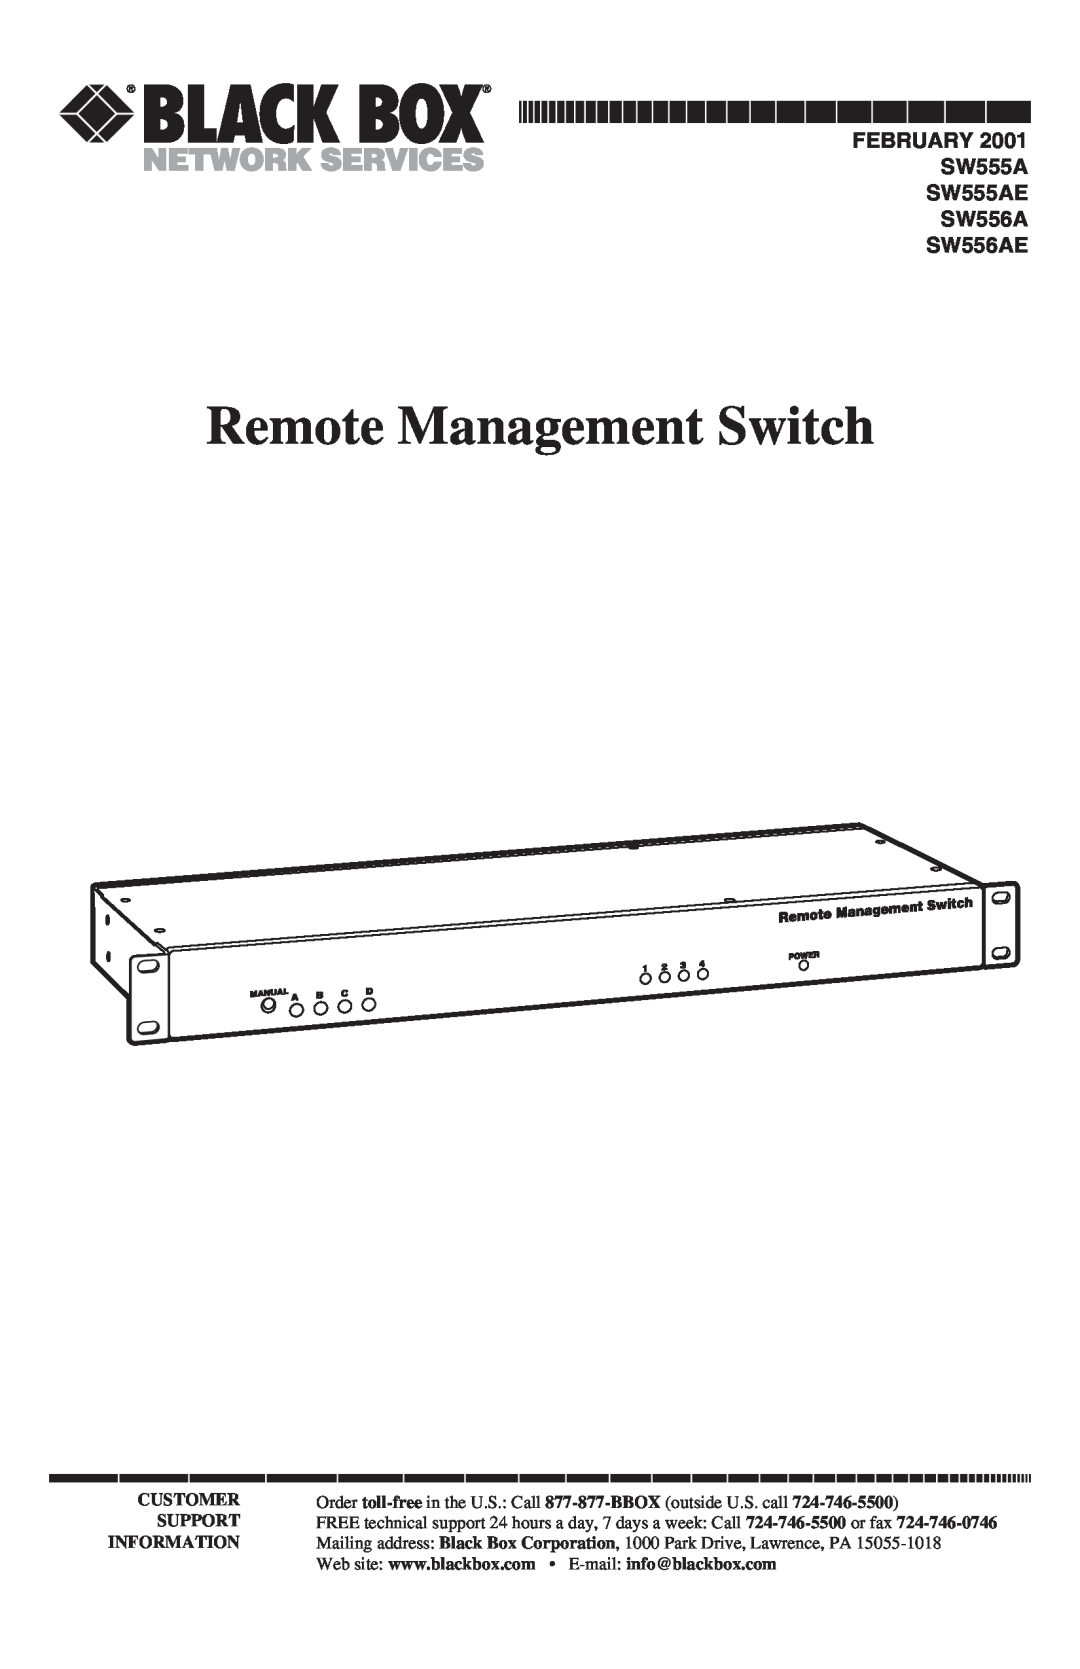 Black Box manual Remote Management Switch, FEBRUARY SW555A SW555AE SW556A SW556AE, Customer, Support 